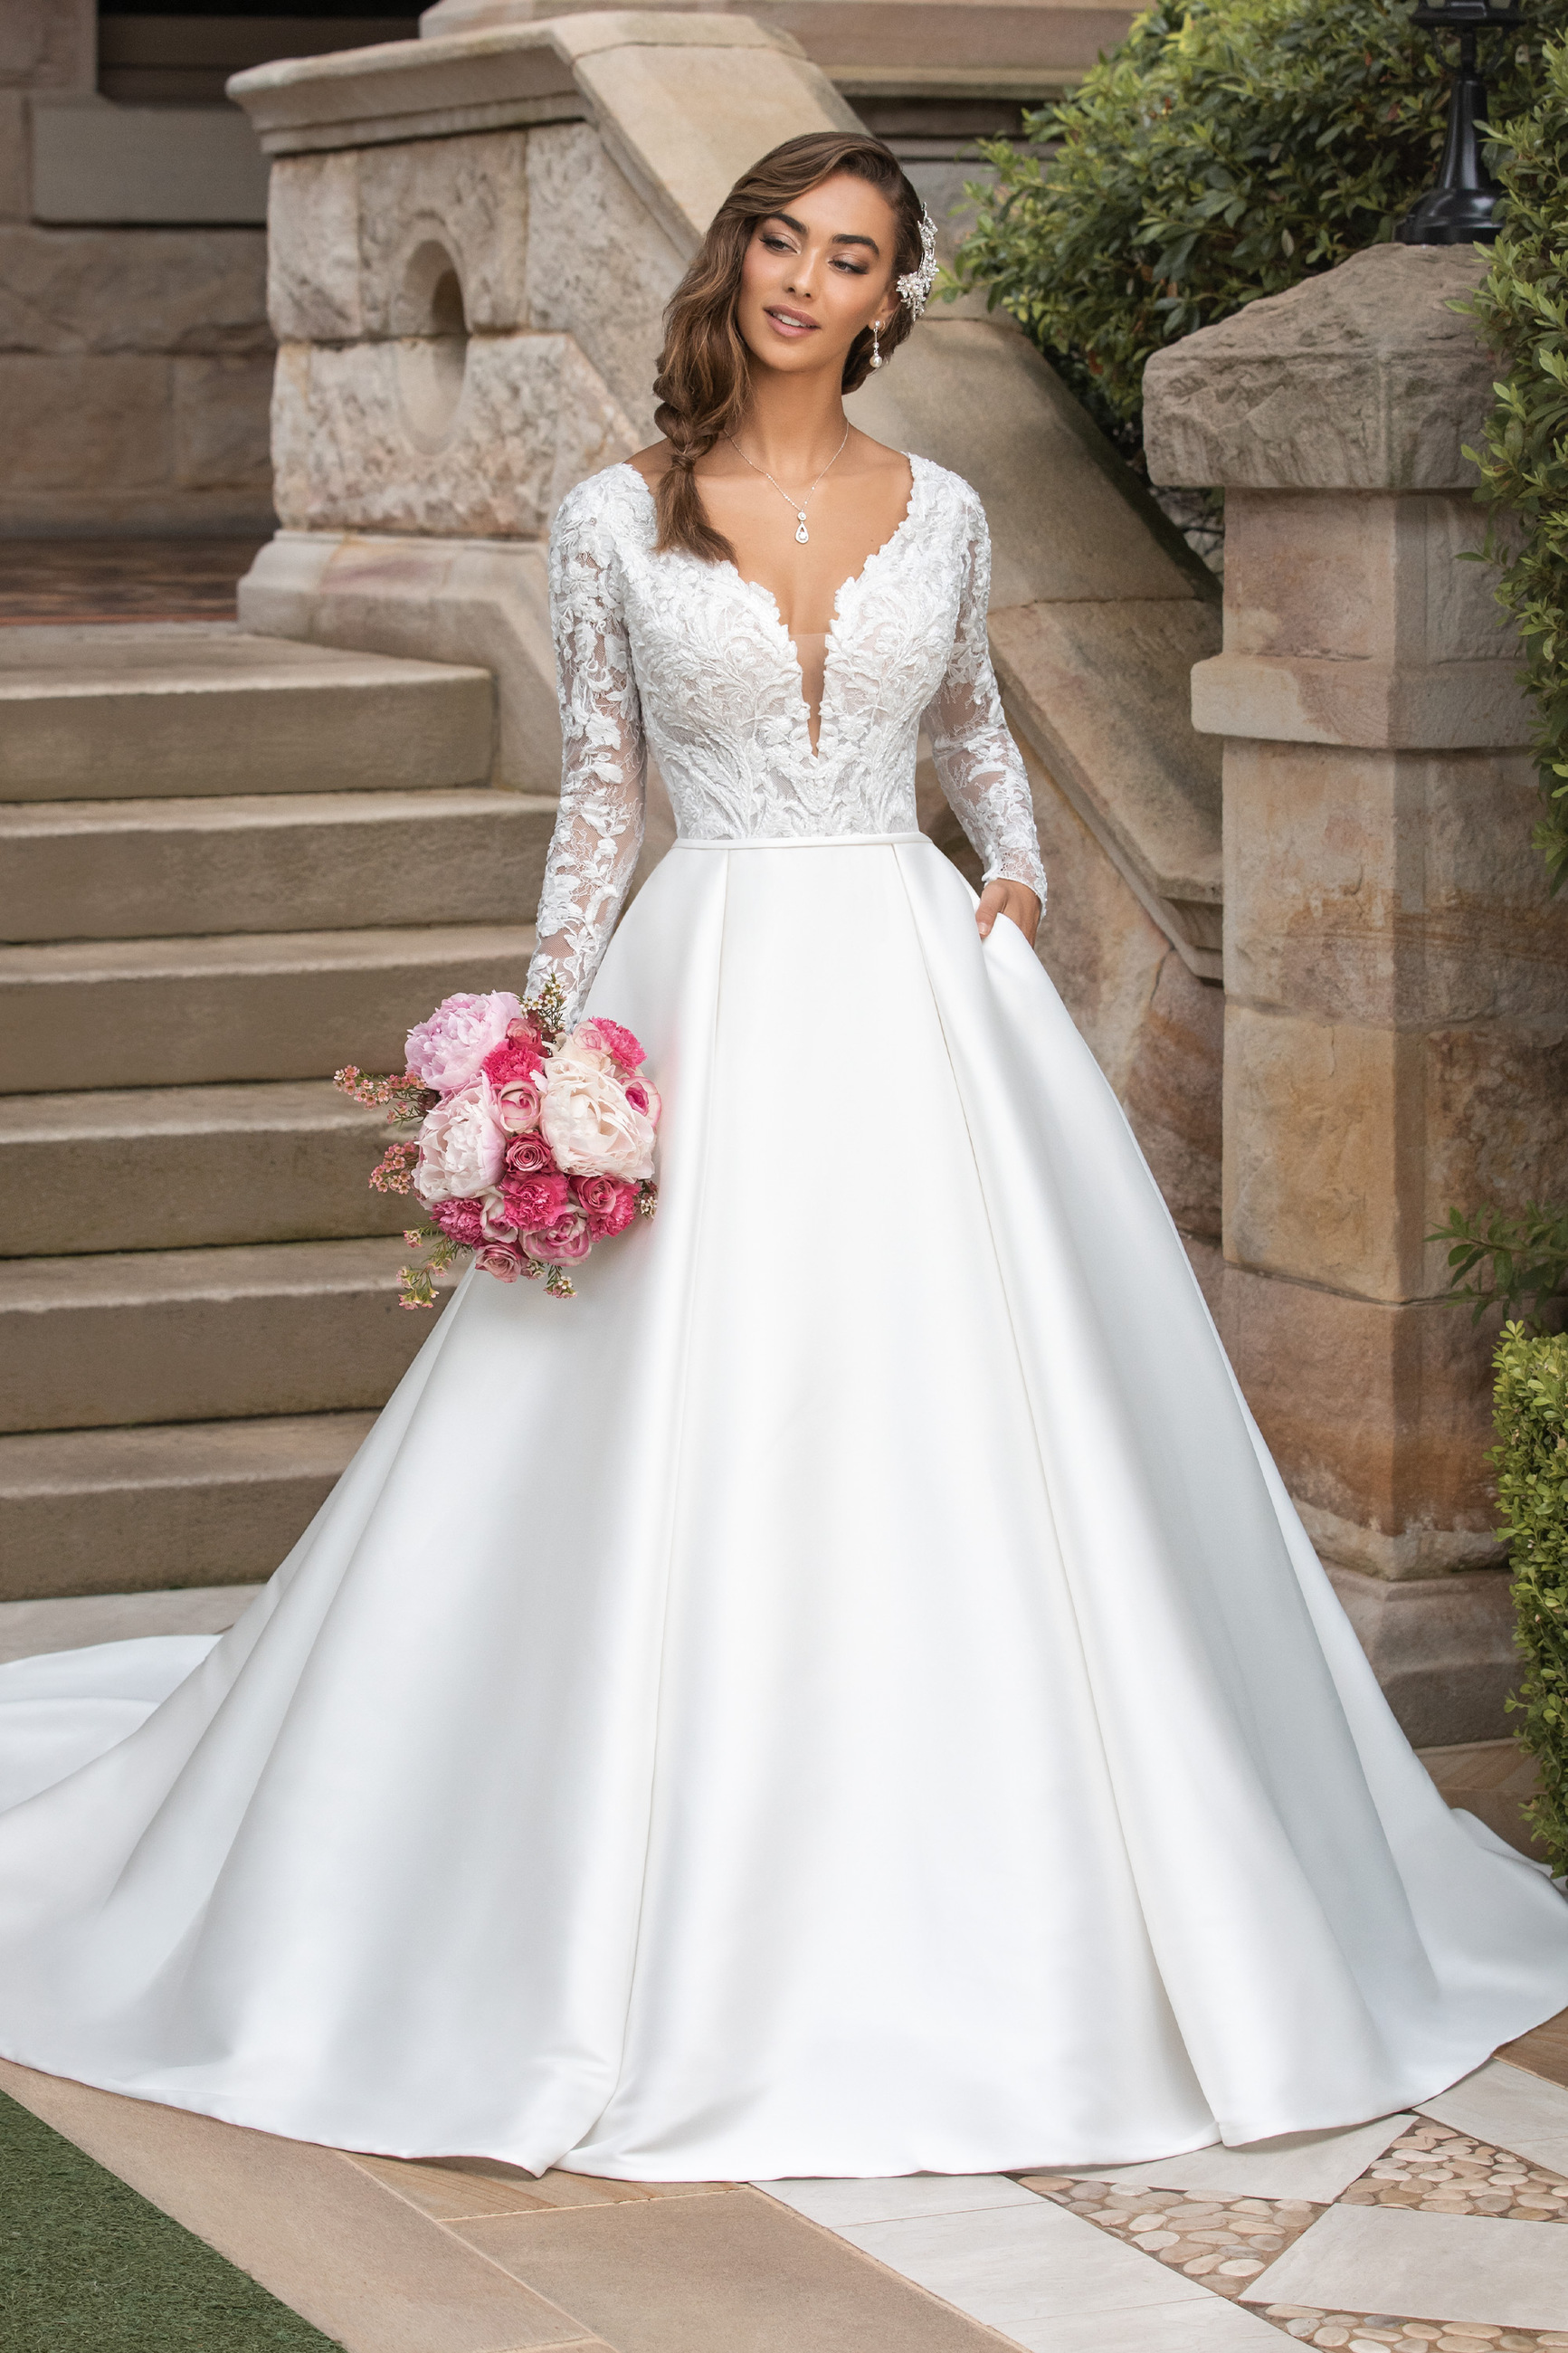 Classic Ball Gown Wedding Dress With Sweetheart Neckline, 48% OFF